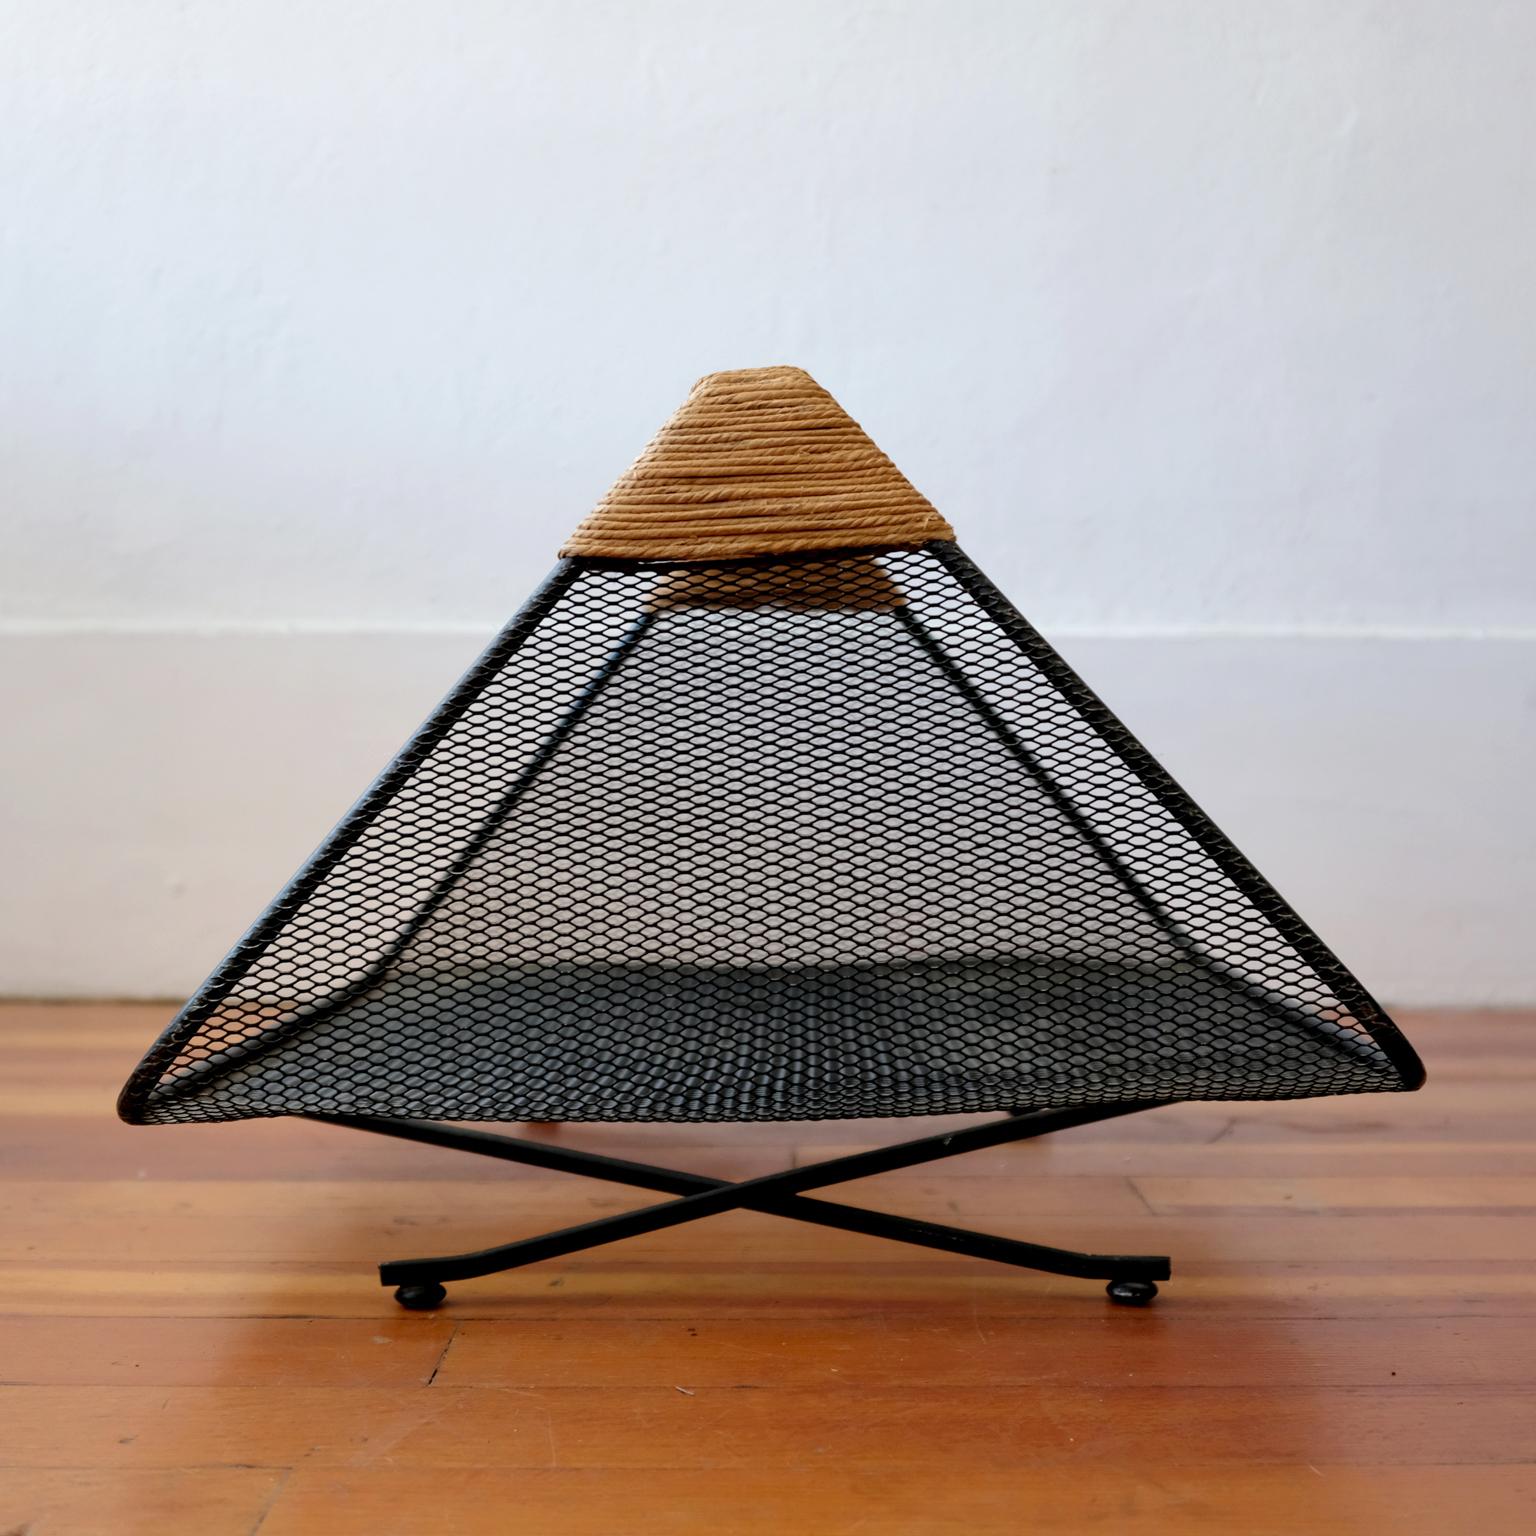 Magazine or log holder by Tony Paul for Woodlin-Hall. Iron frame, mesh body and rush-wrapped handle, 1950s.